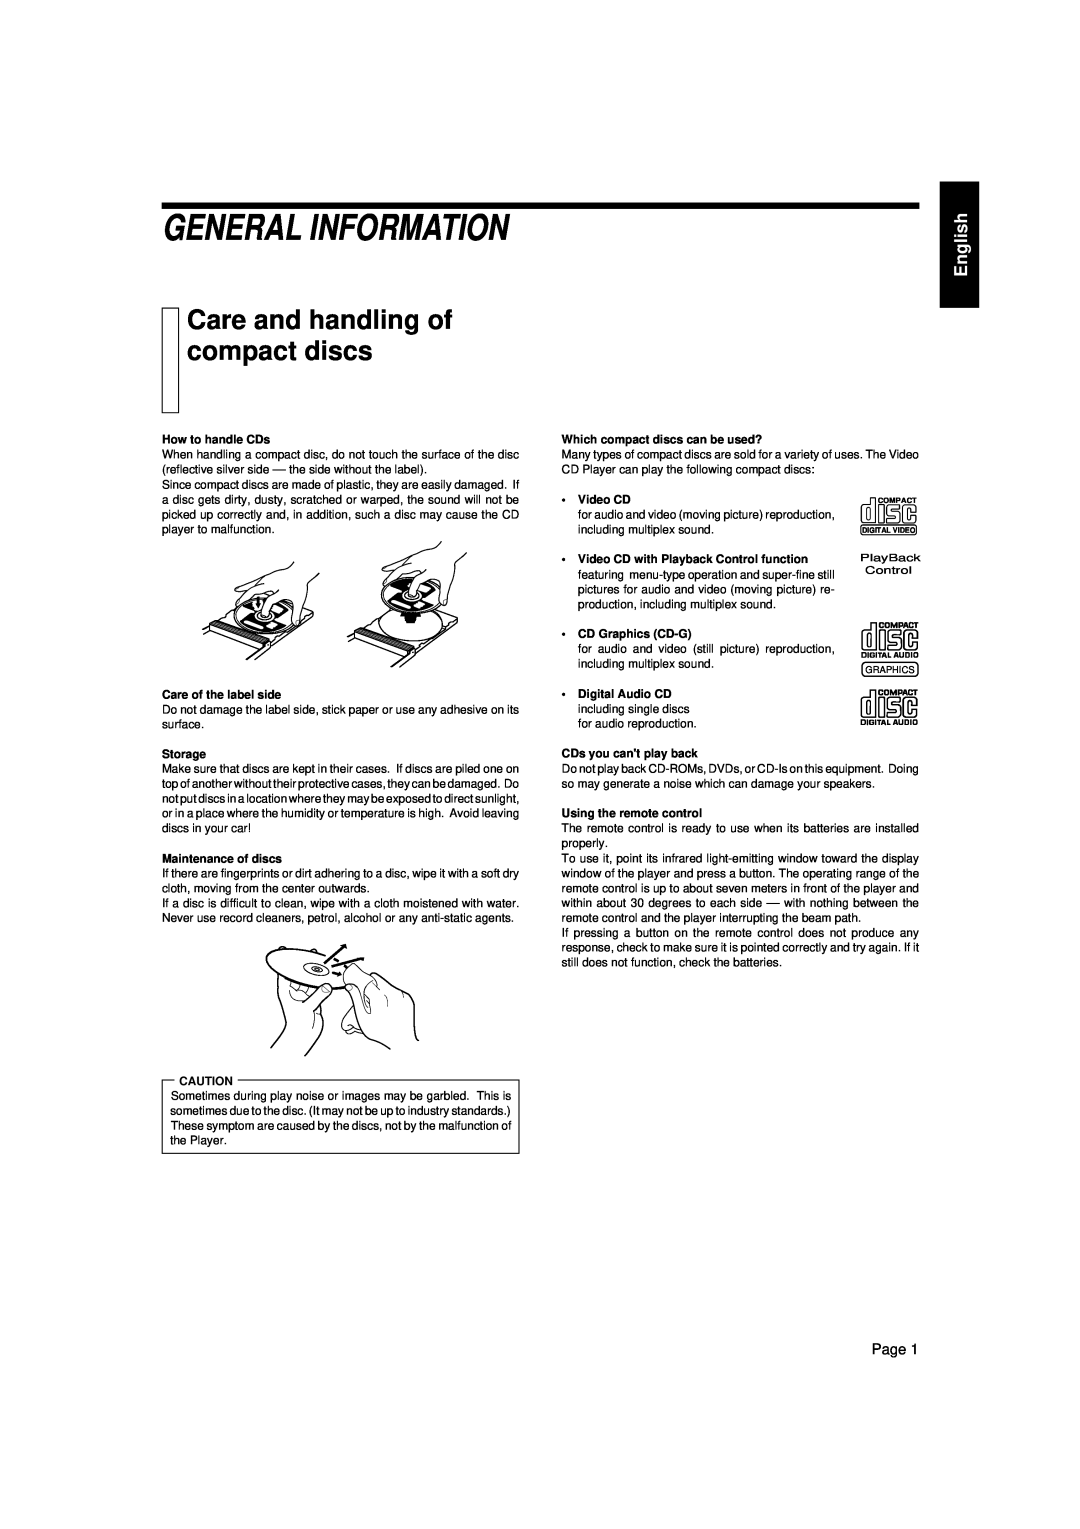 JVC XL-SV23GD manual General Information, Care and handling of compact discs, English, Page 